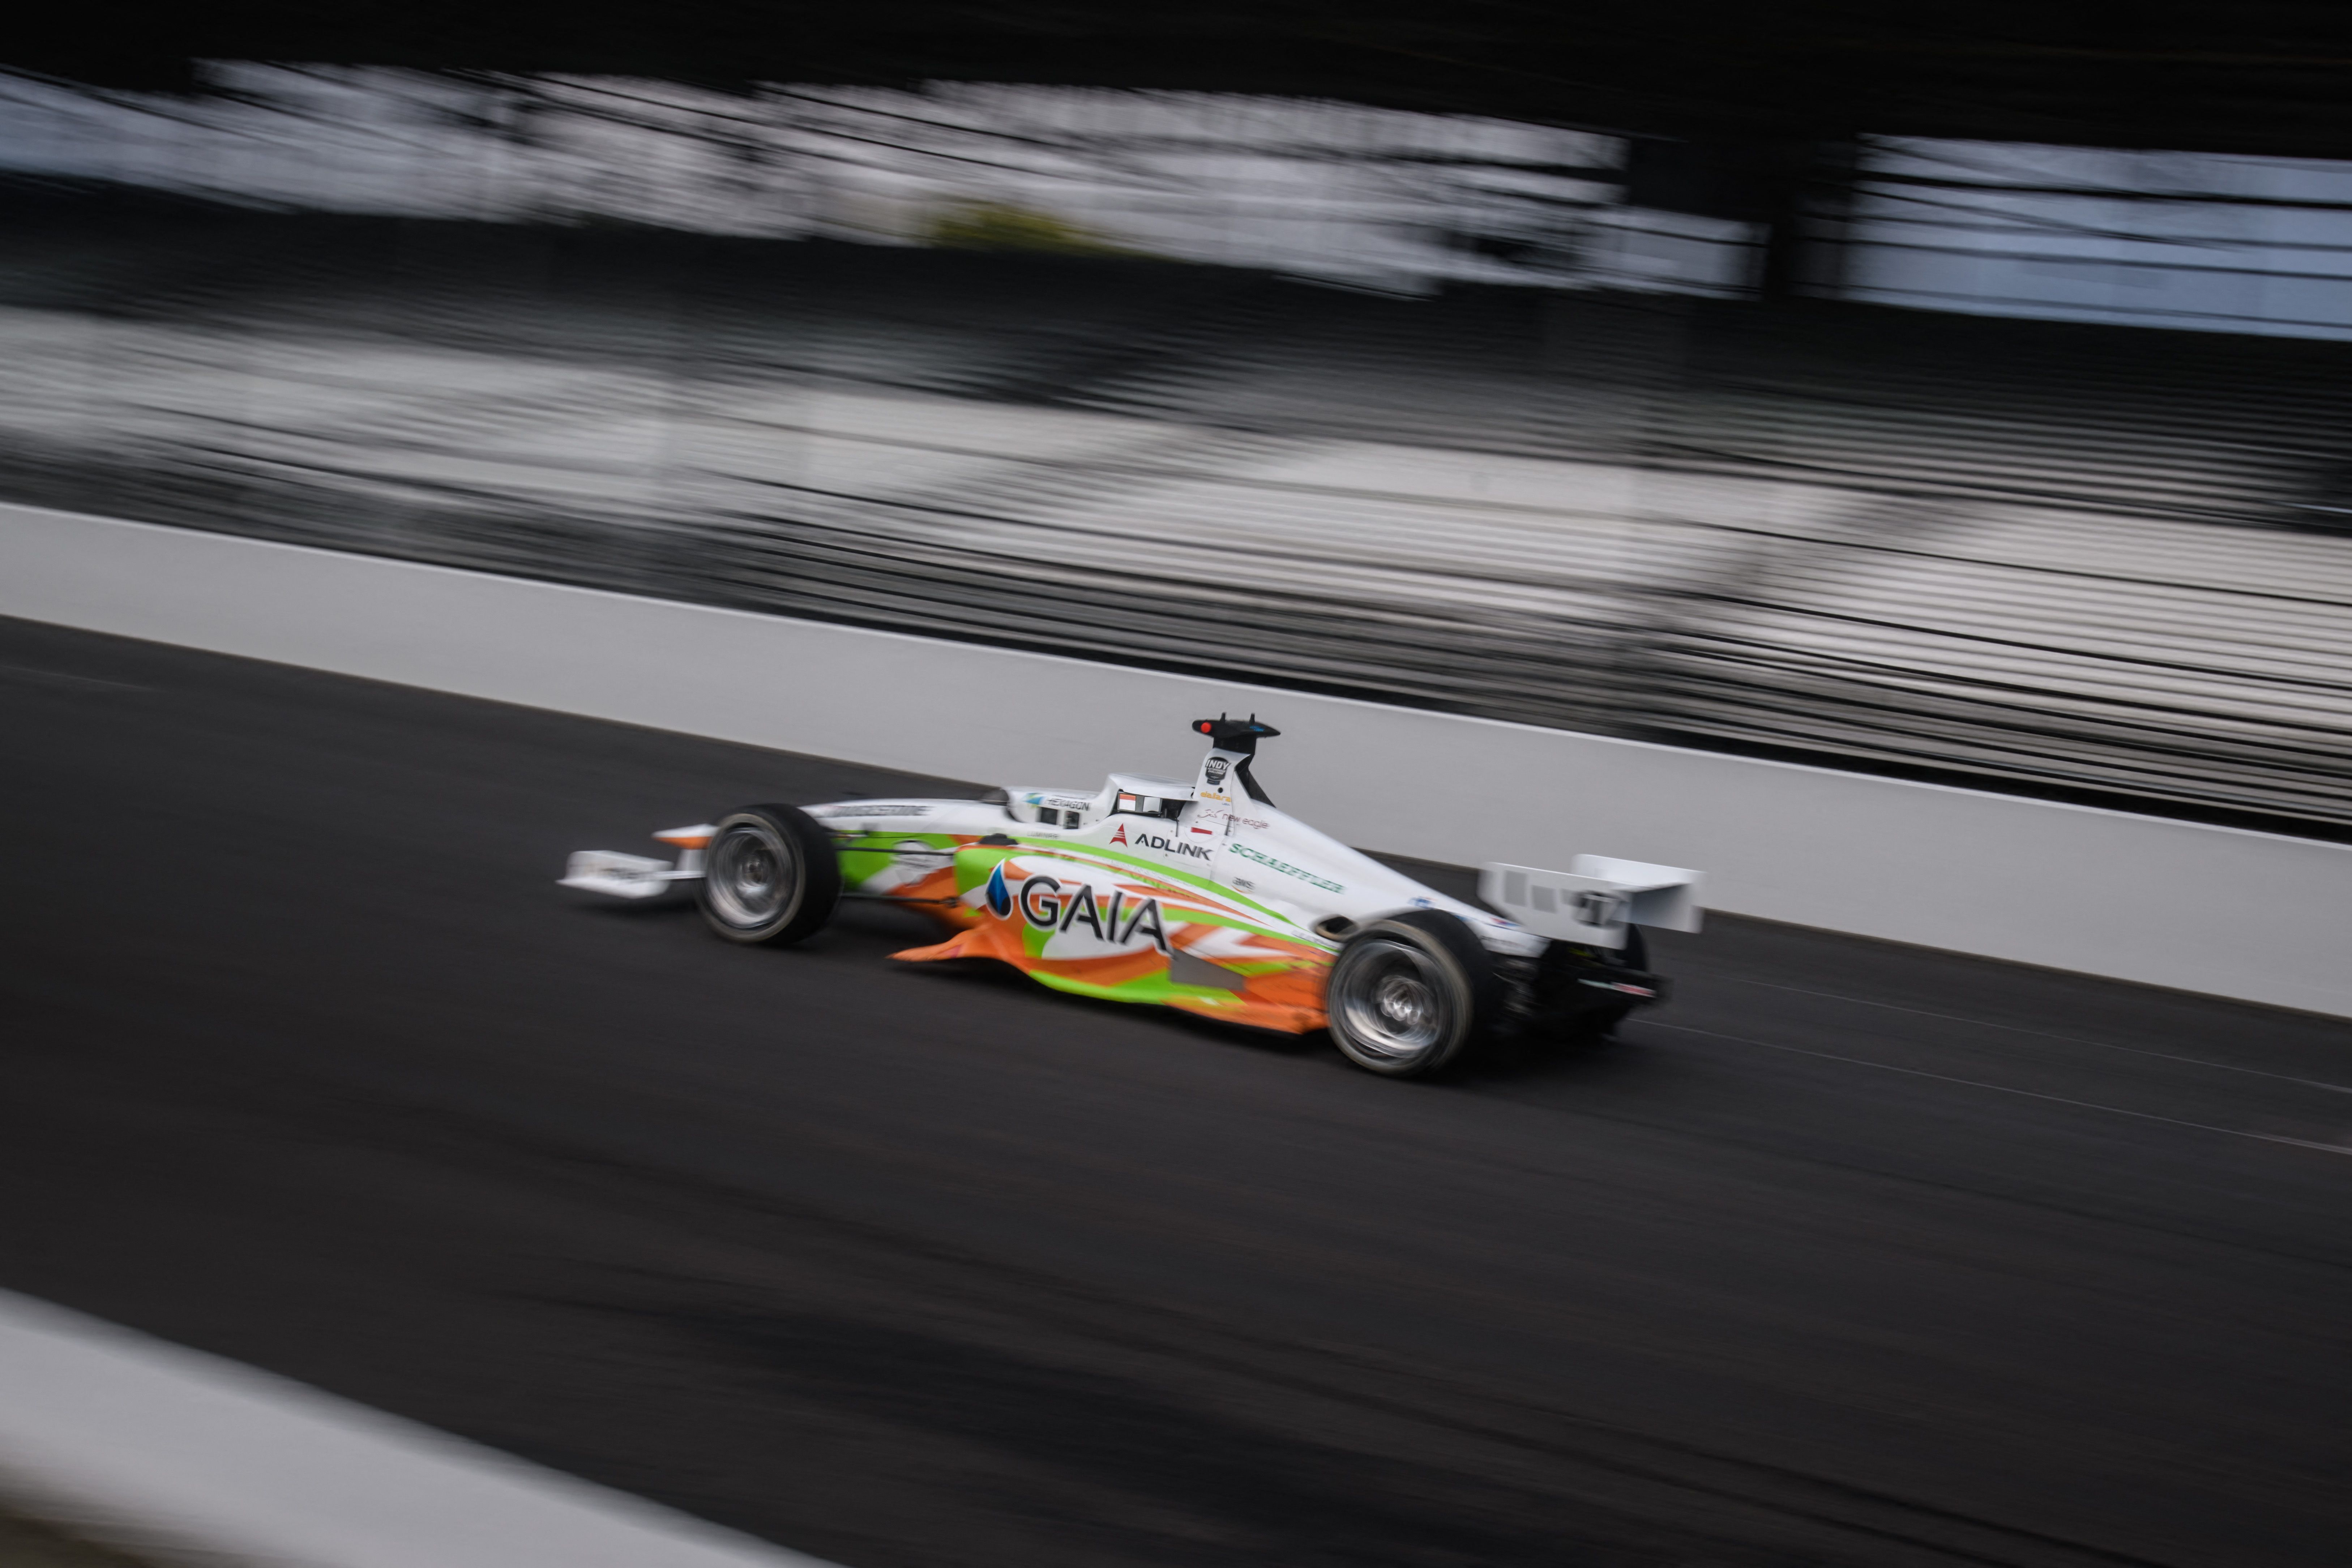 The car of AI Racing Tech of Hawaii University completes a lap during the Indy Autonomous Challenge race at the Indianapolis Speedway in Indianapolis on October 23. 